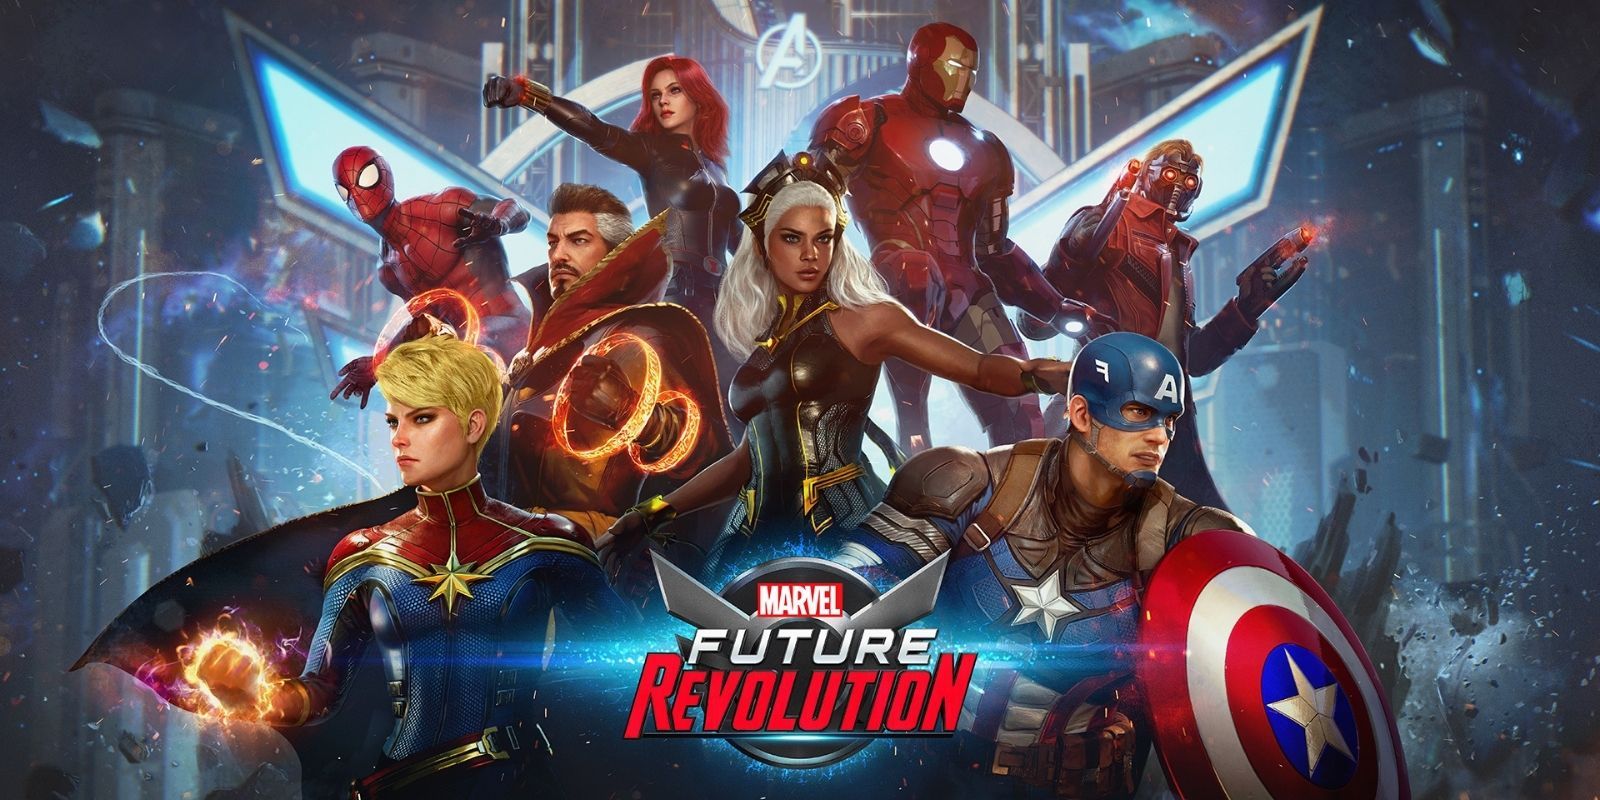 Promotional image for Marvel Future Revolution, Featuring Storm, Captain America, Star-Lord, Spider-Man, Captain Marvel, Black Widow, Iron Man and Doctor Strange